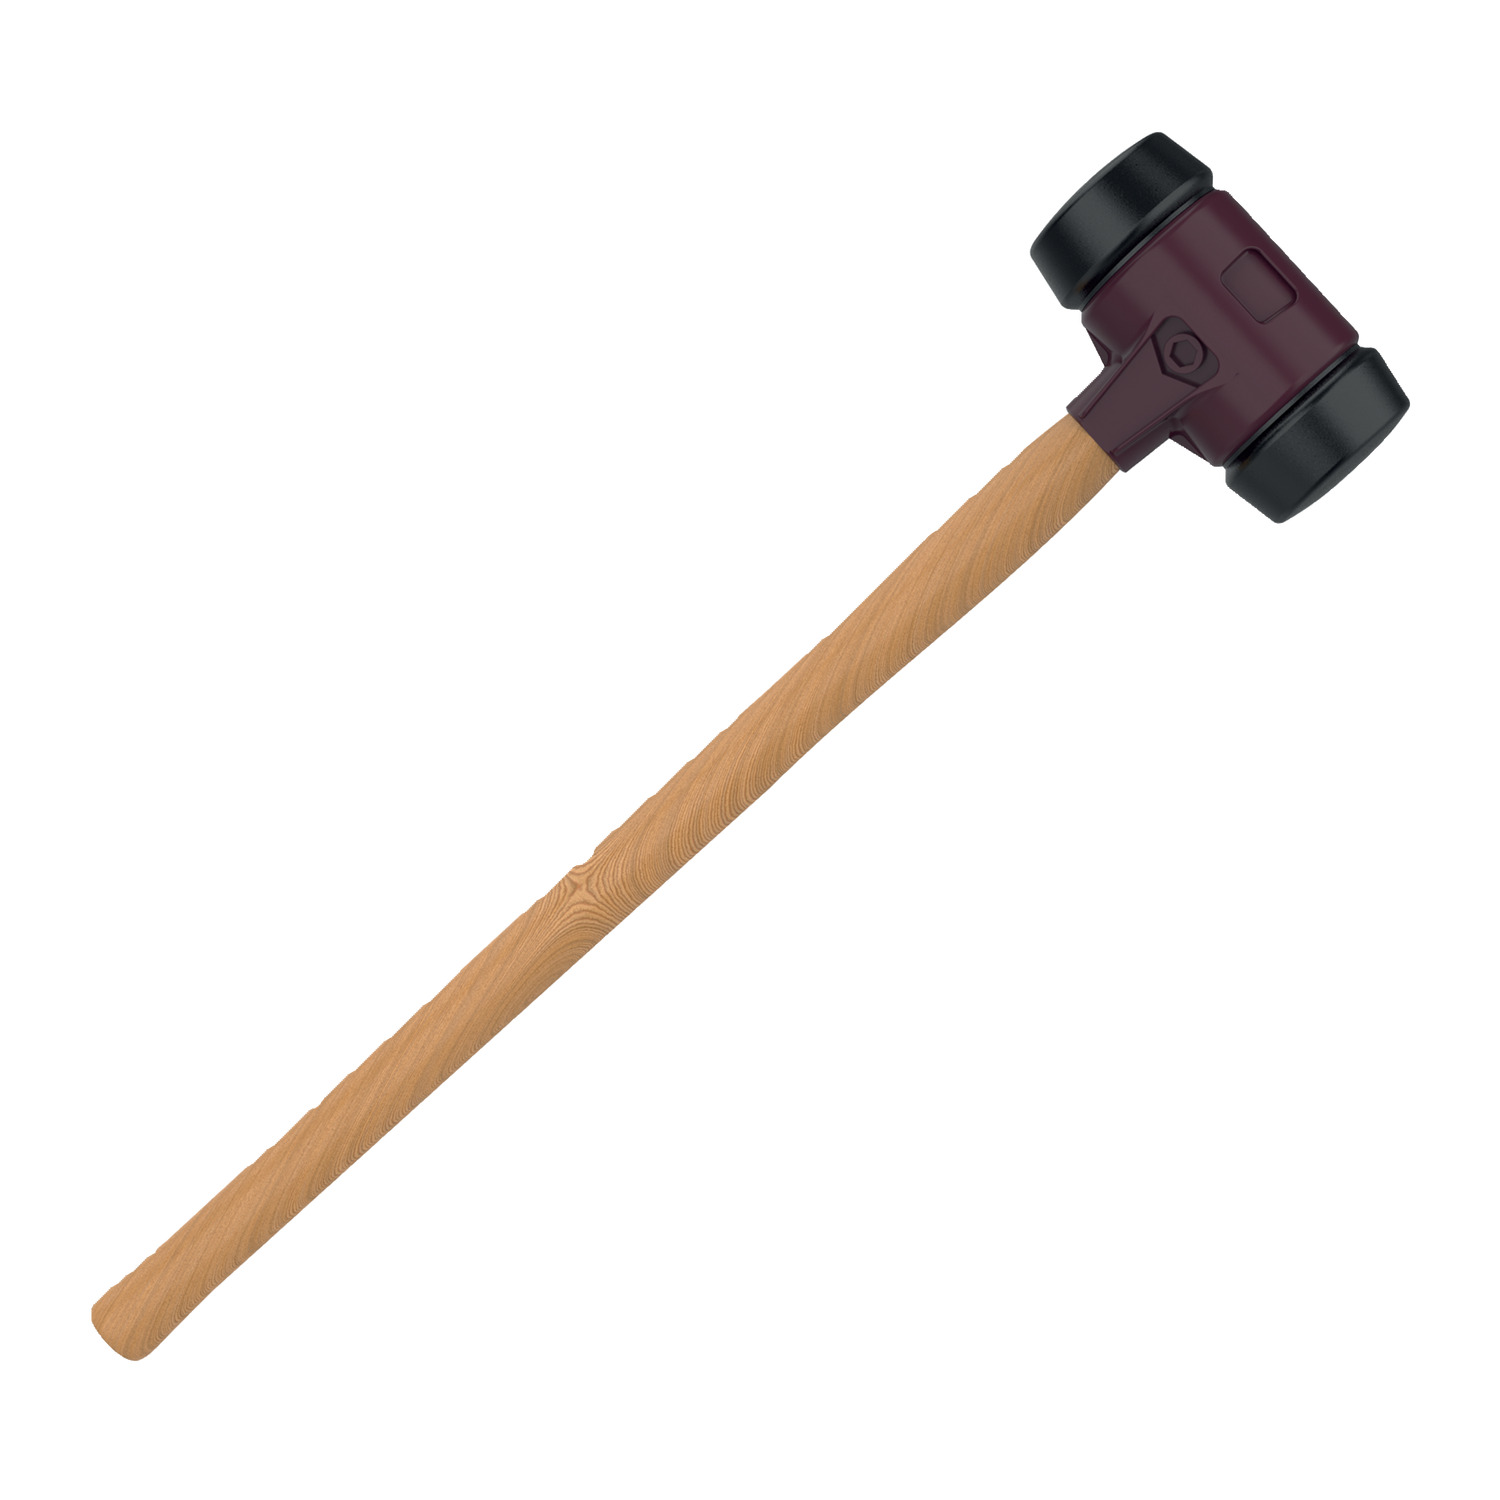 Sledge Hammers Industrial sledge hammers with range of inter-changeable inserts enabling one mallet to cover a range of applications. Inserts, housings and handles can be bought separately creating a flexible easy to use modular mallet system.